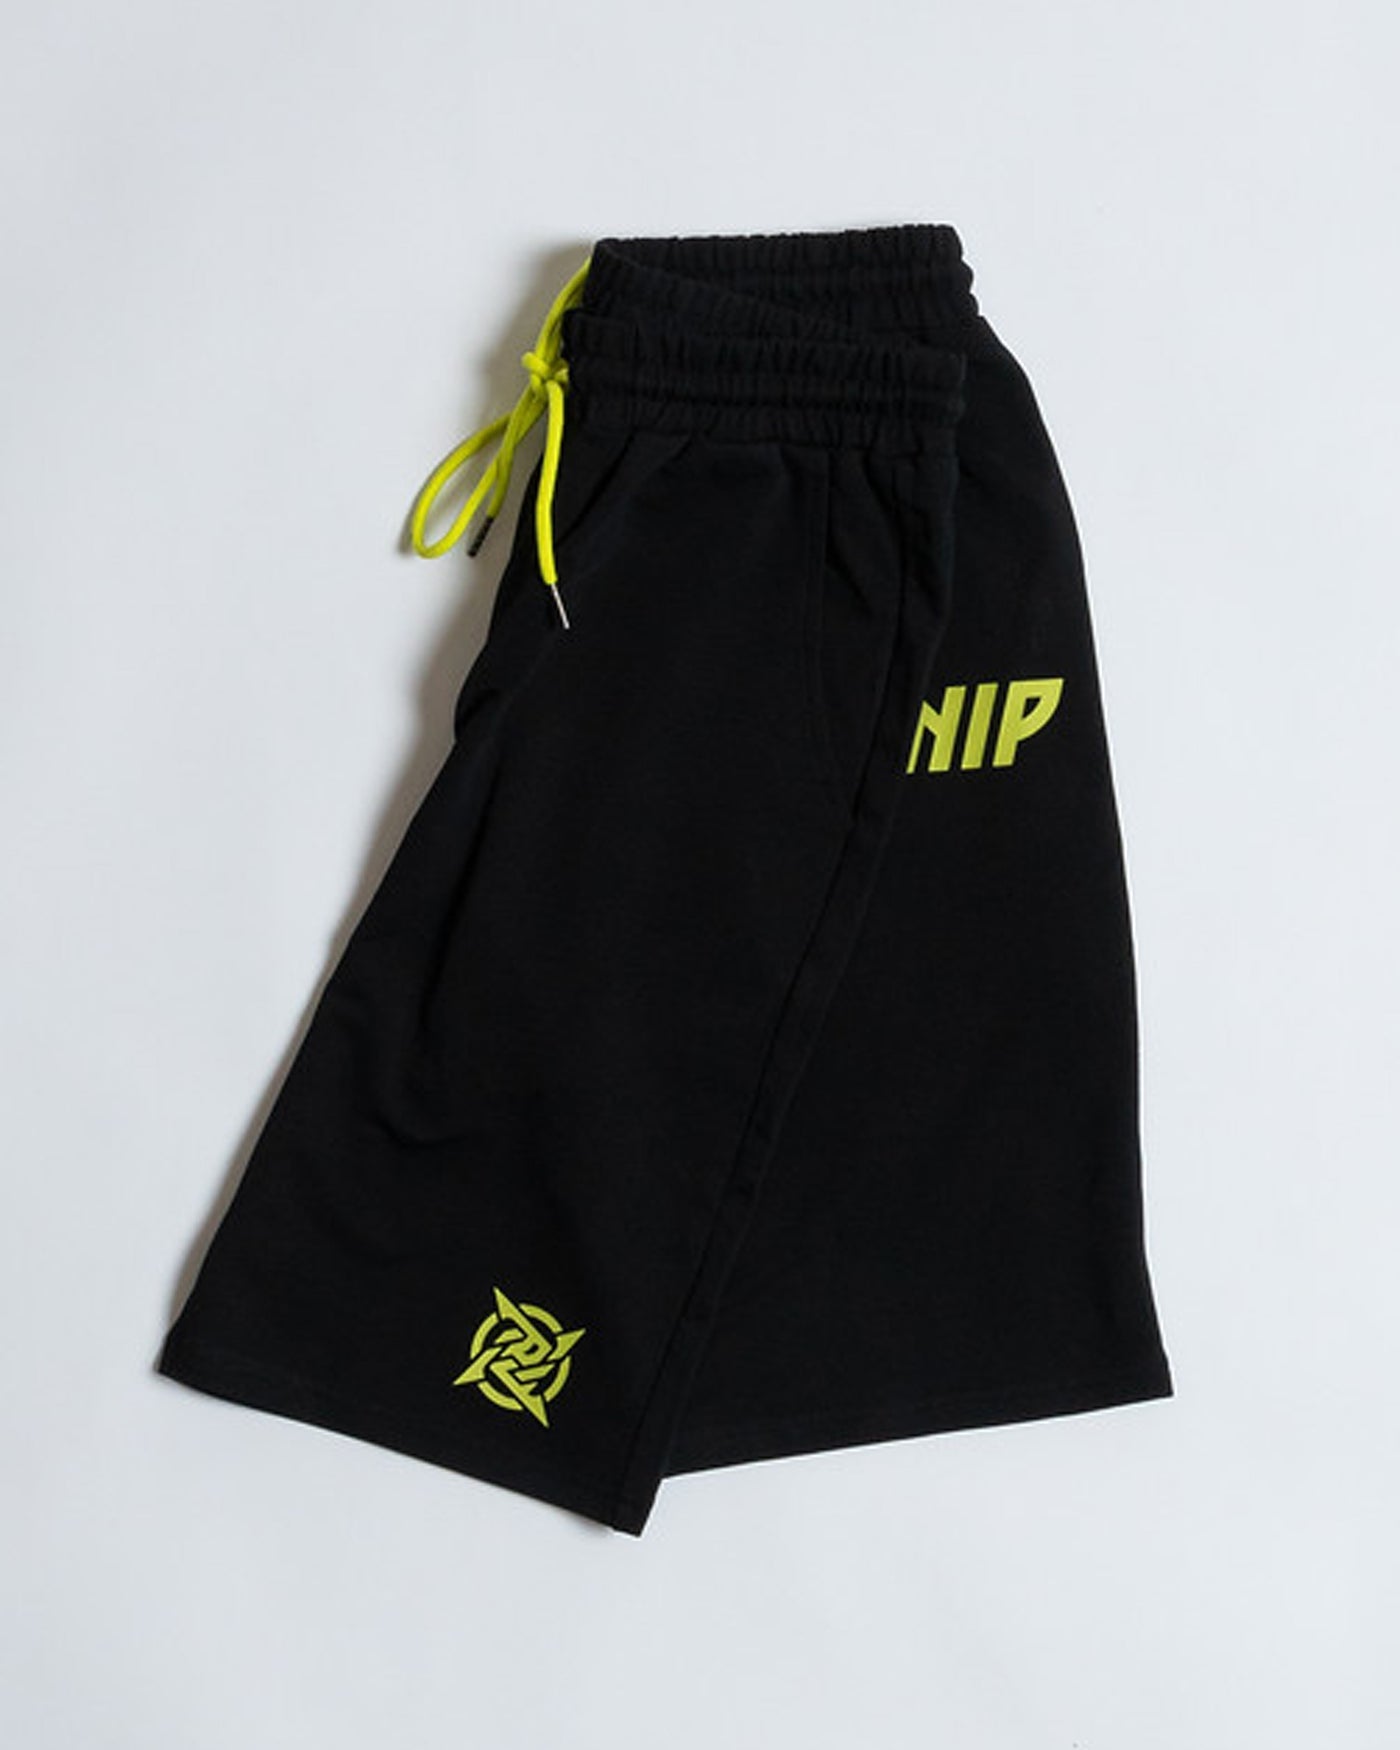 Lagom Collection - Black Shorts from Ninjas in Pyjamas Shop. A pair of black shorts from the Lagom Merch Collection, featuring the subtle Ninjas in Pyjamas logo on the side. These comfortable and stylish shorts are perfect for casual wear or as activewear, allowing you to showcase your support for NIP and esports in ultimate comfort and style.